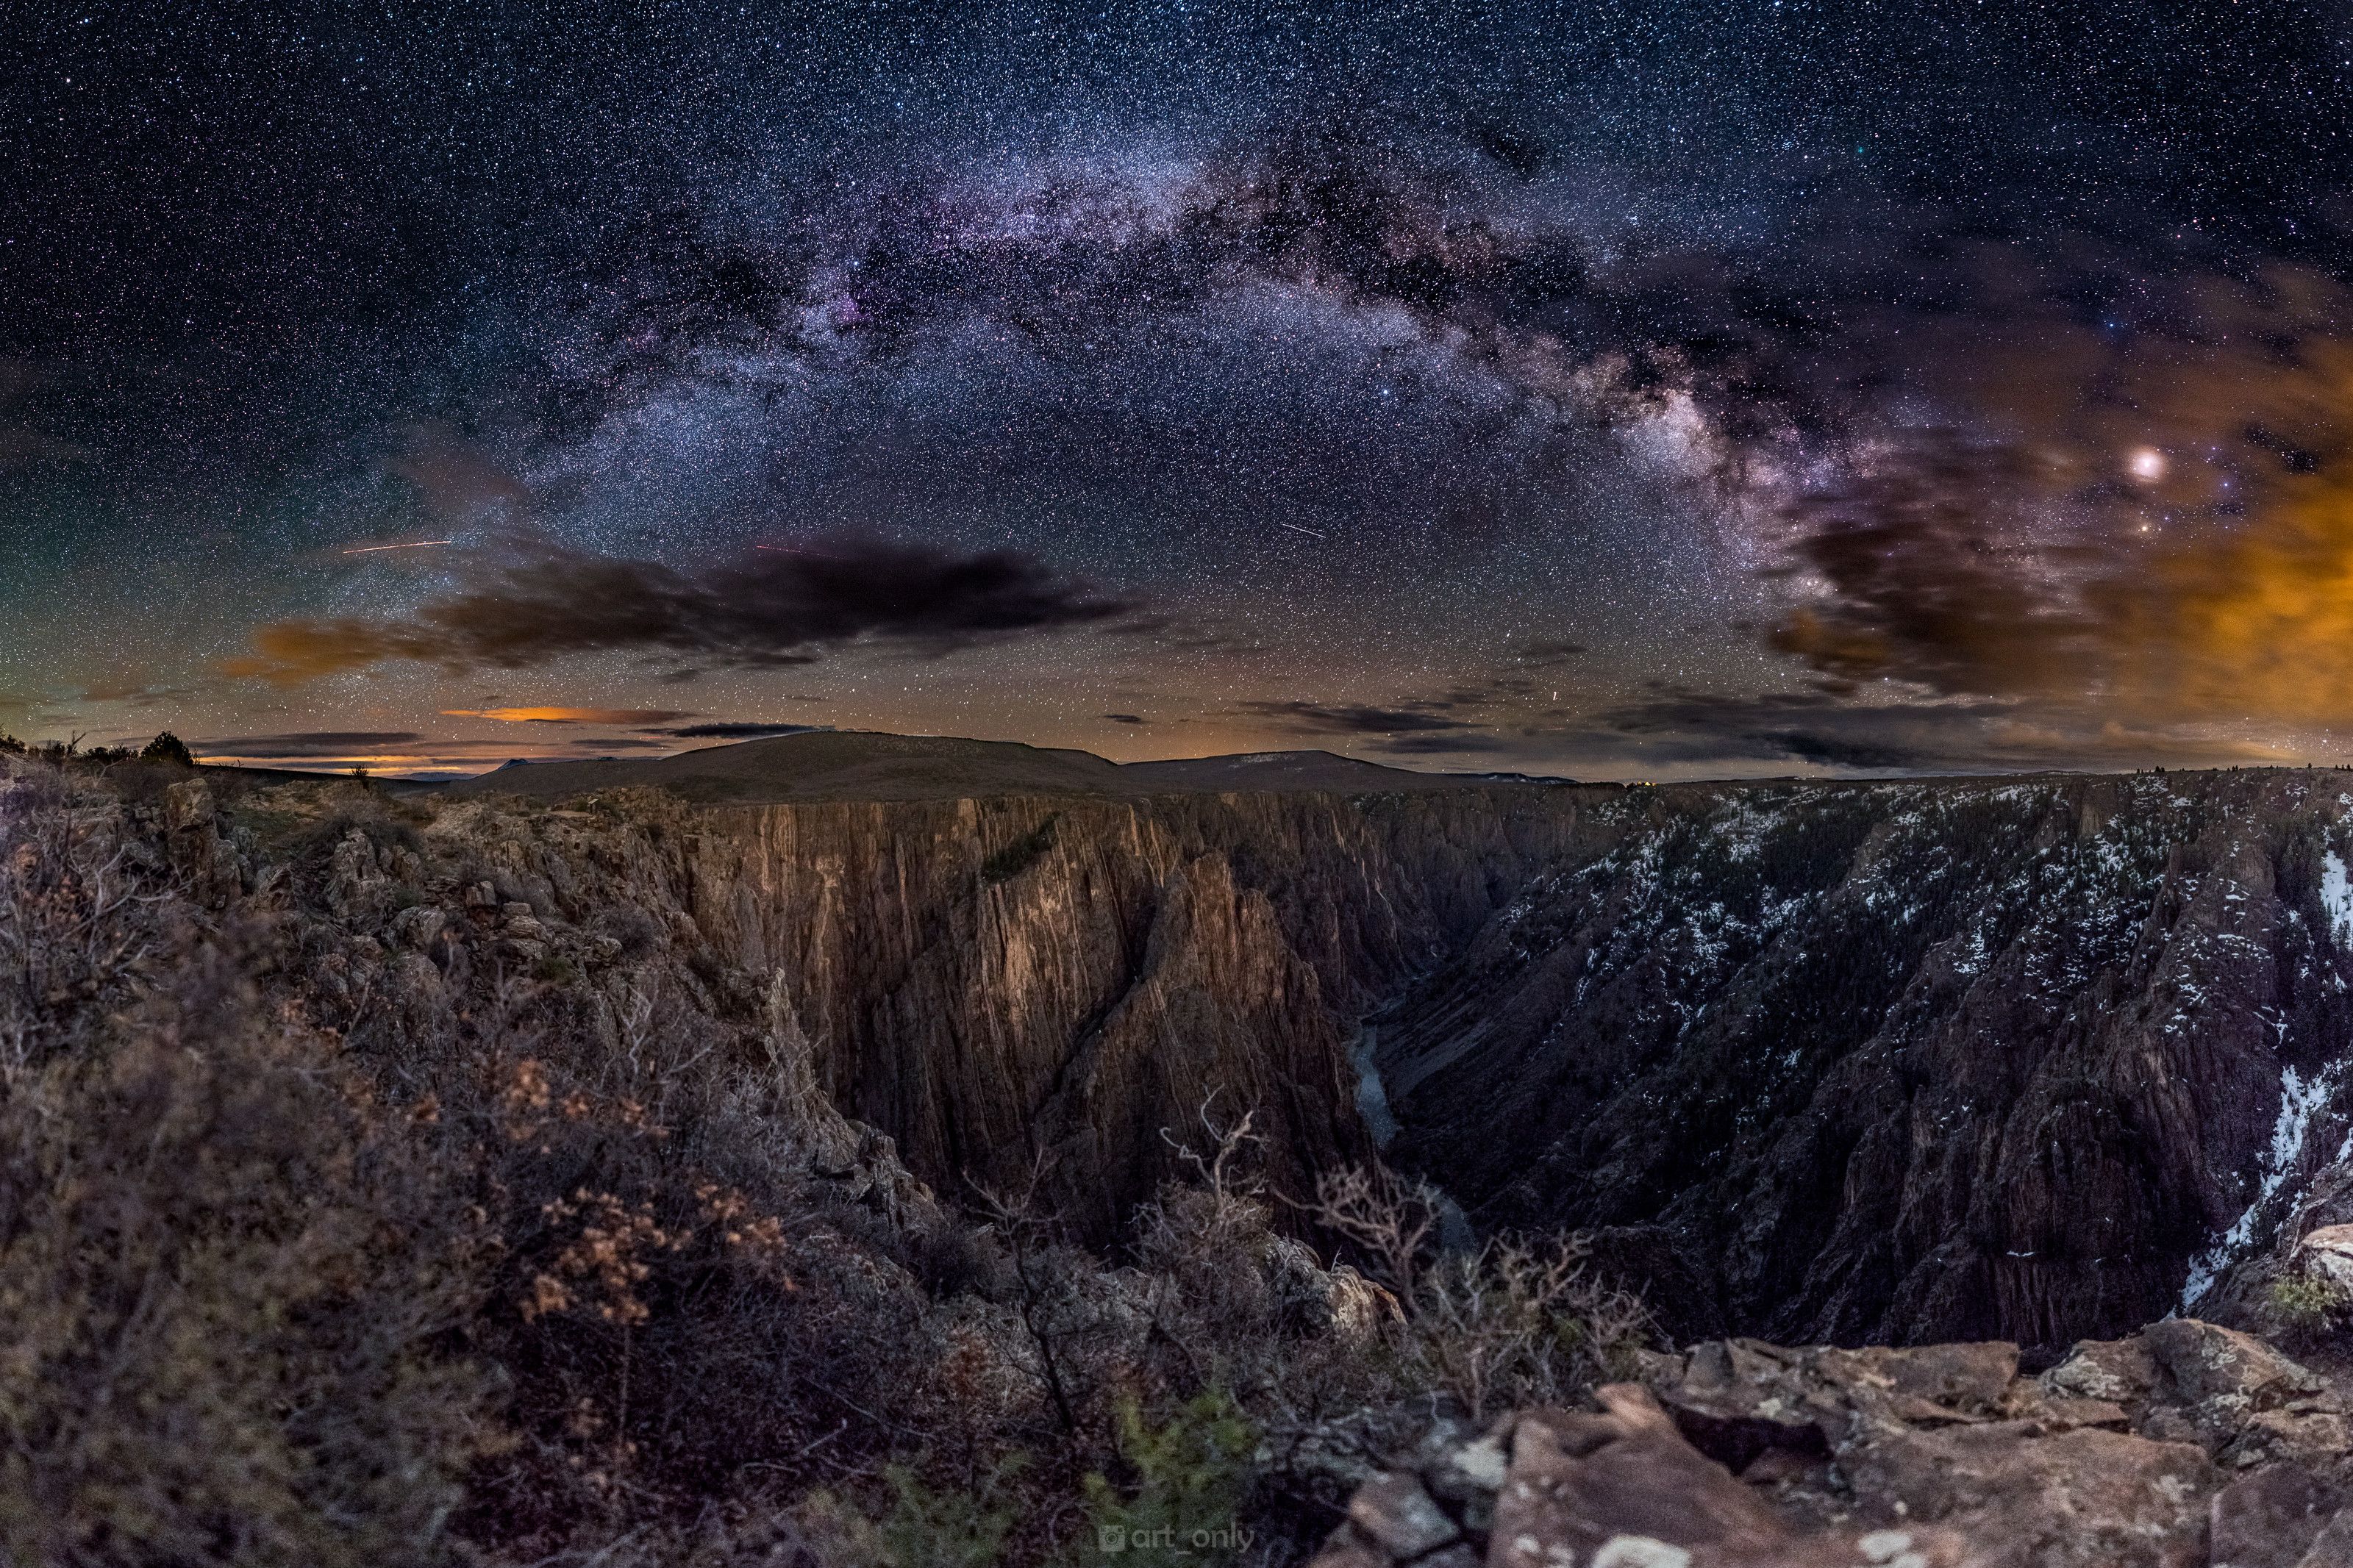 I went to see Black Canyon Of the Gunnison in Colorado at night